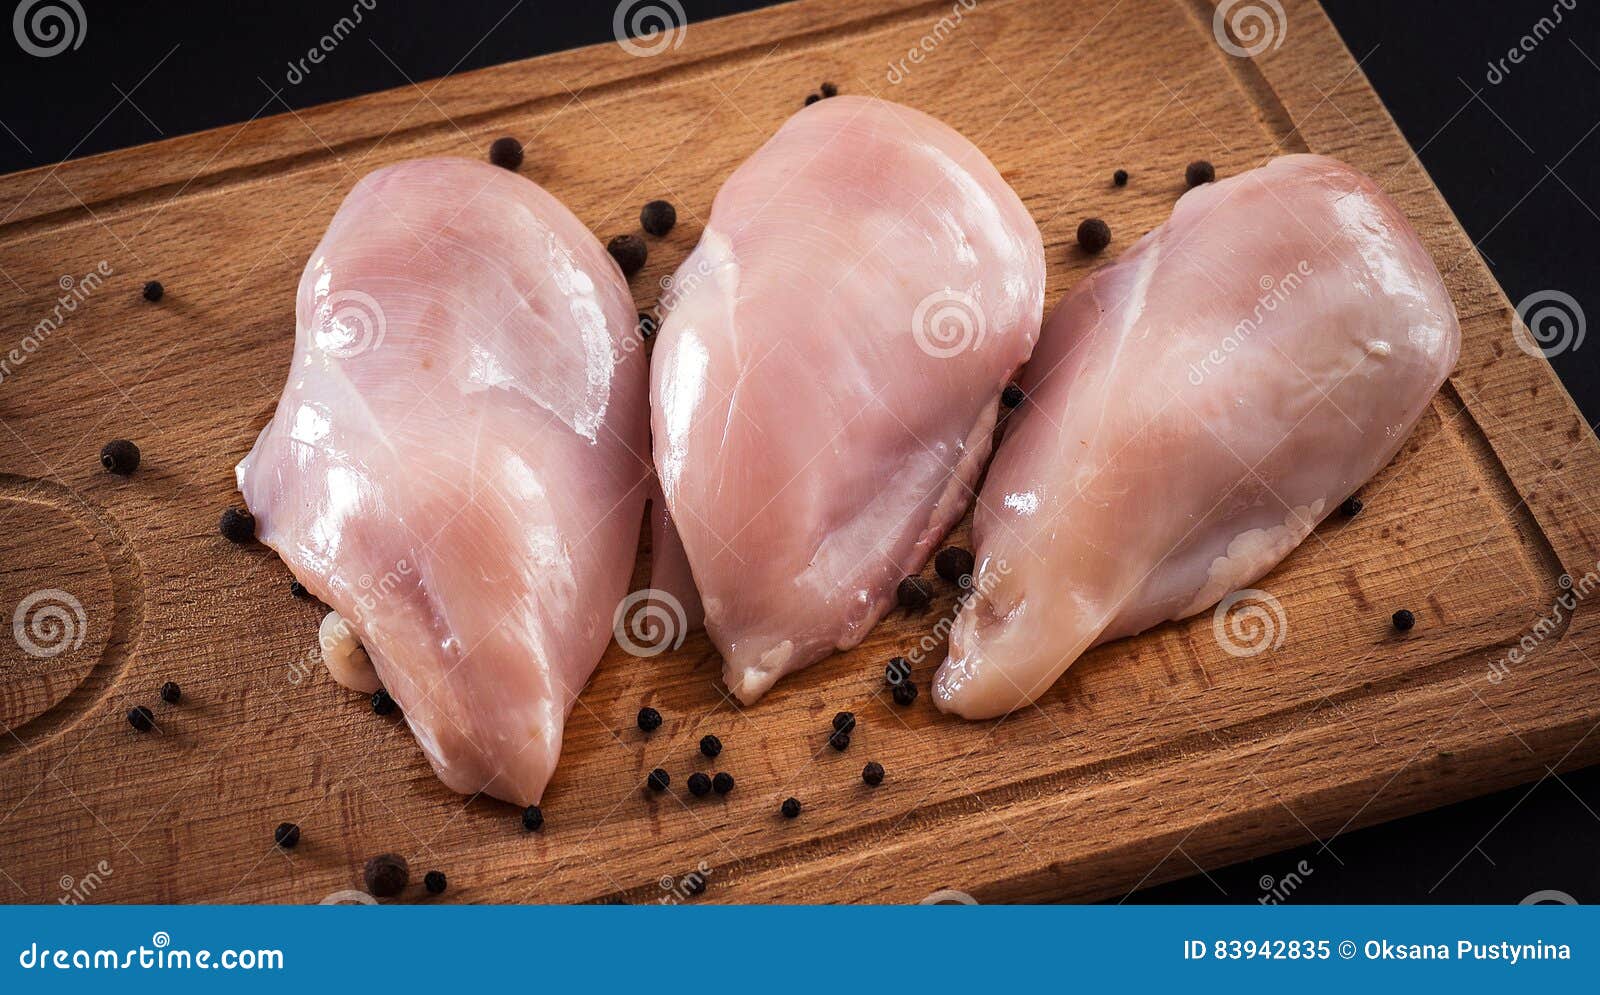 Raw Chicken Breasts and Spices on Wooden Cutting Board Stock Image ...